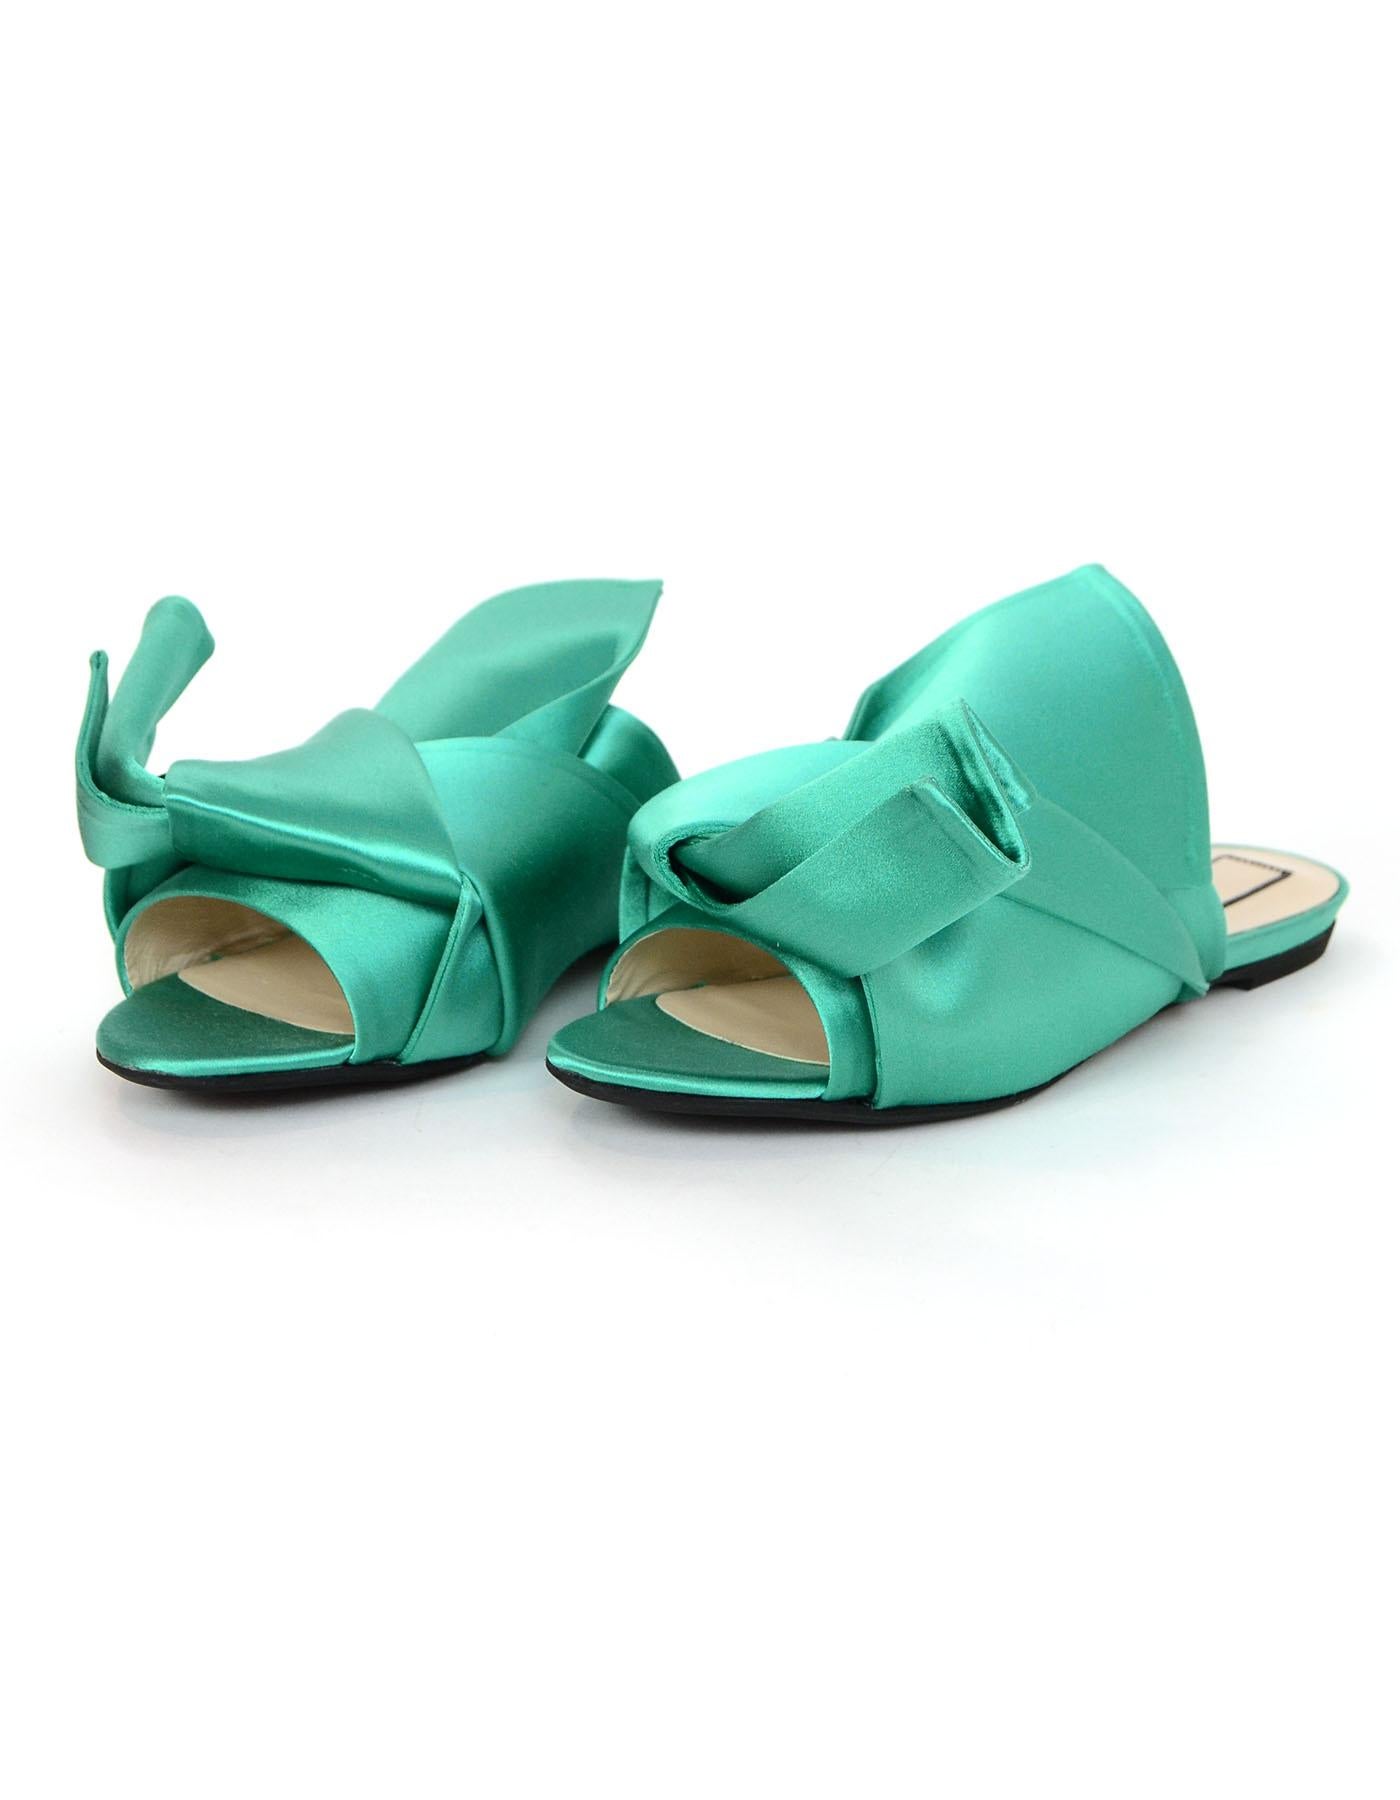 No 21 Green Satin Knotted Open-Toe Mules Sz 39.5 NIB

Made In: Italy
Color: Green
Materials: Satin
Closure/Opening: Slide on
Sole Stamp: No 21 Made in Italy 39.5
Overall Condition: Excellent pre-owned condition - NIB
Included: No 21 box

Marked